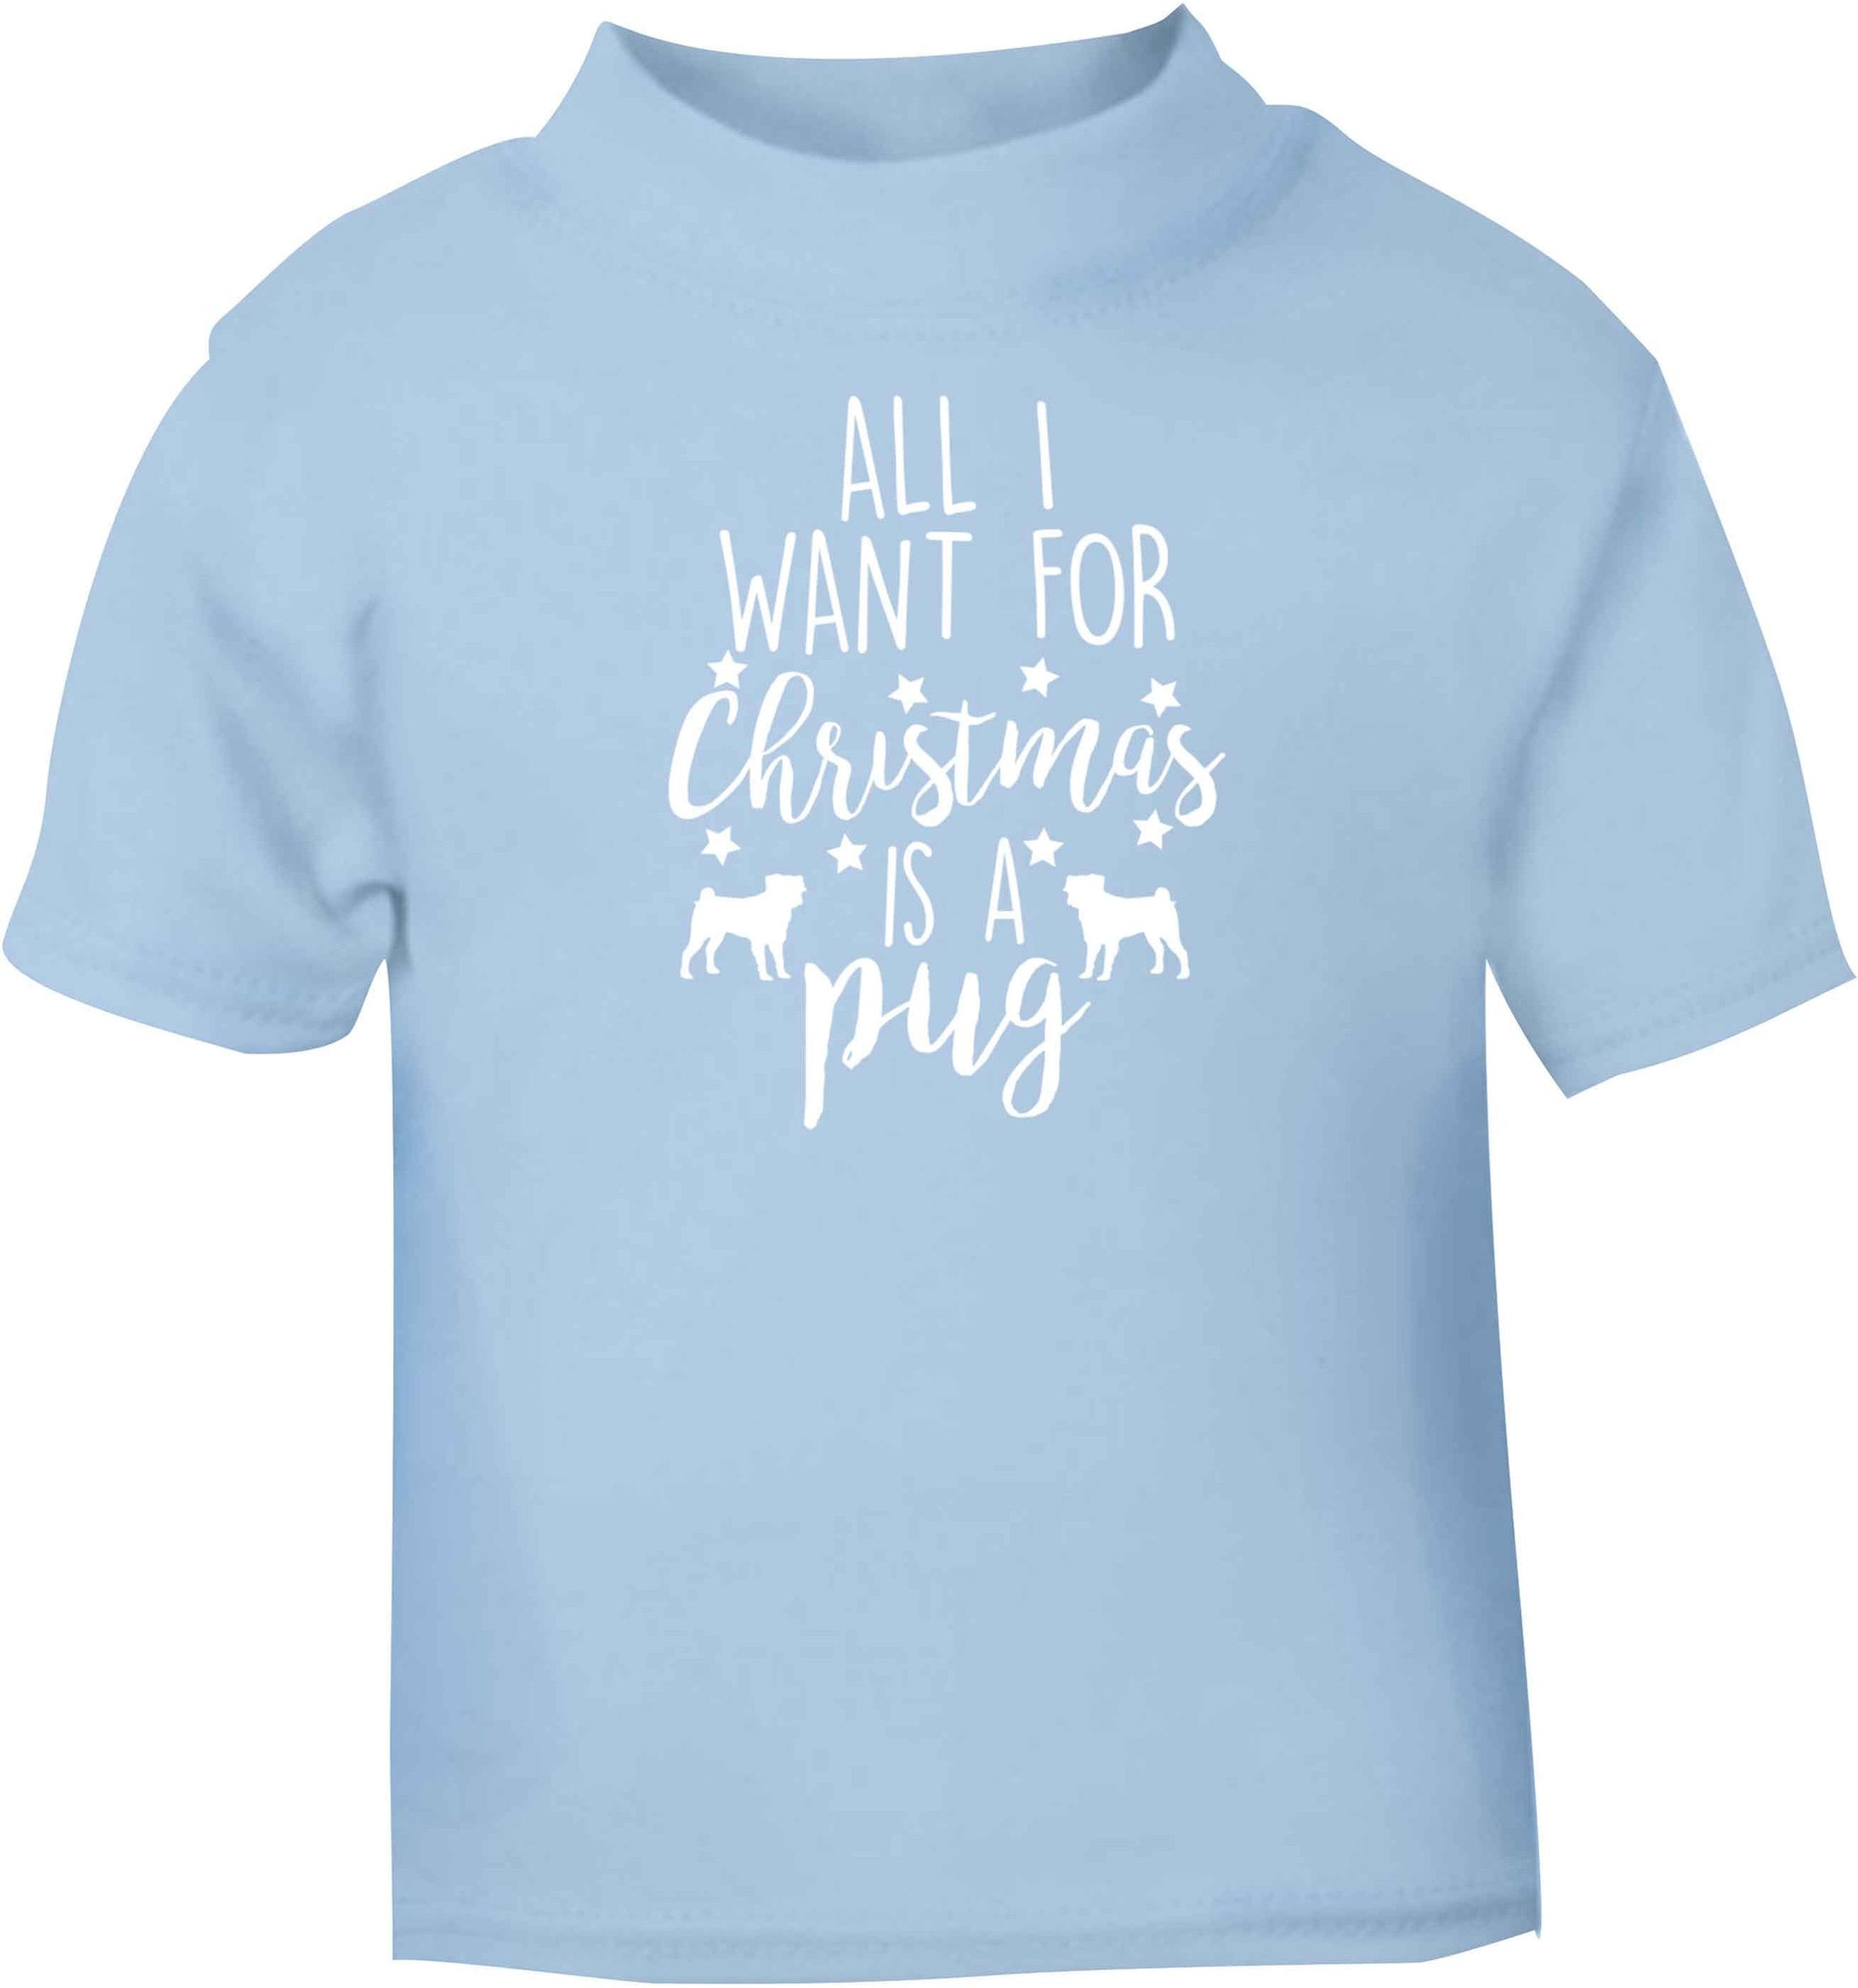 All I want for Christmas is a pug light blue baby toddler Tshirt 2 Years